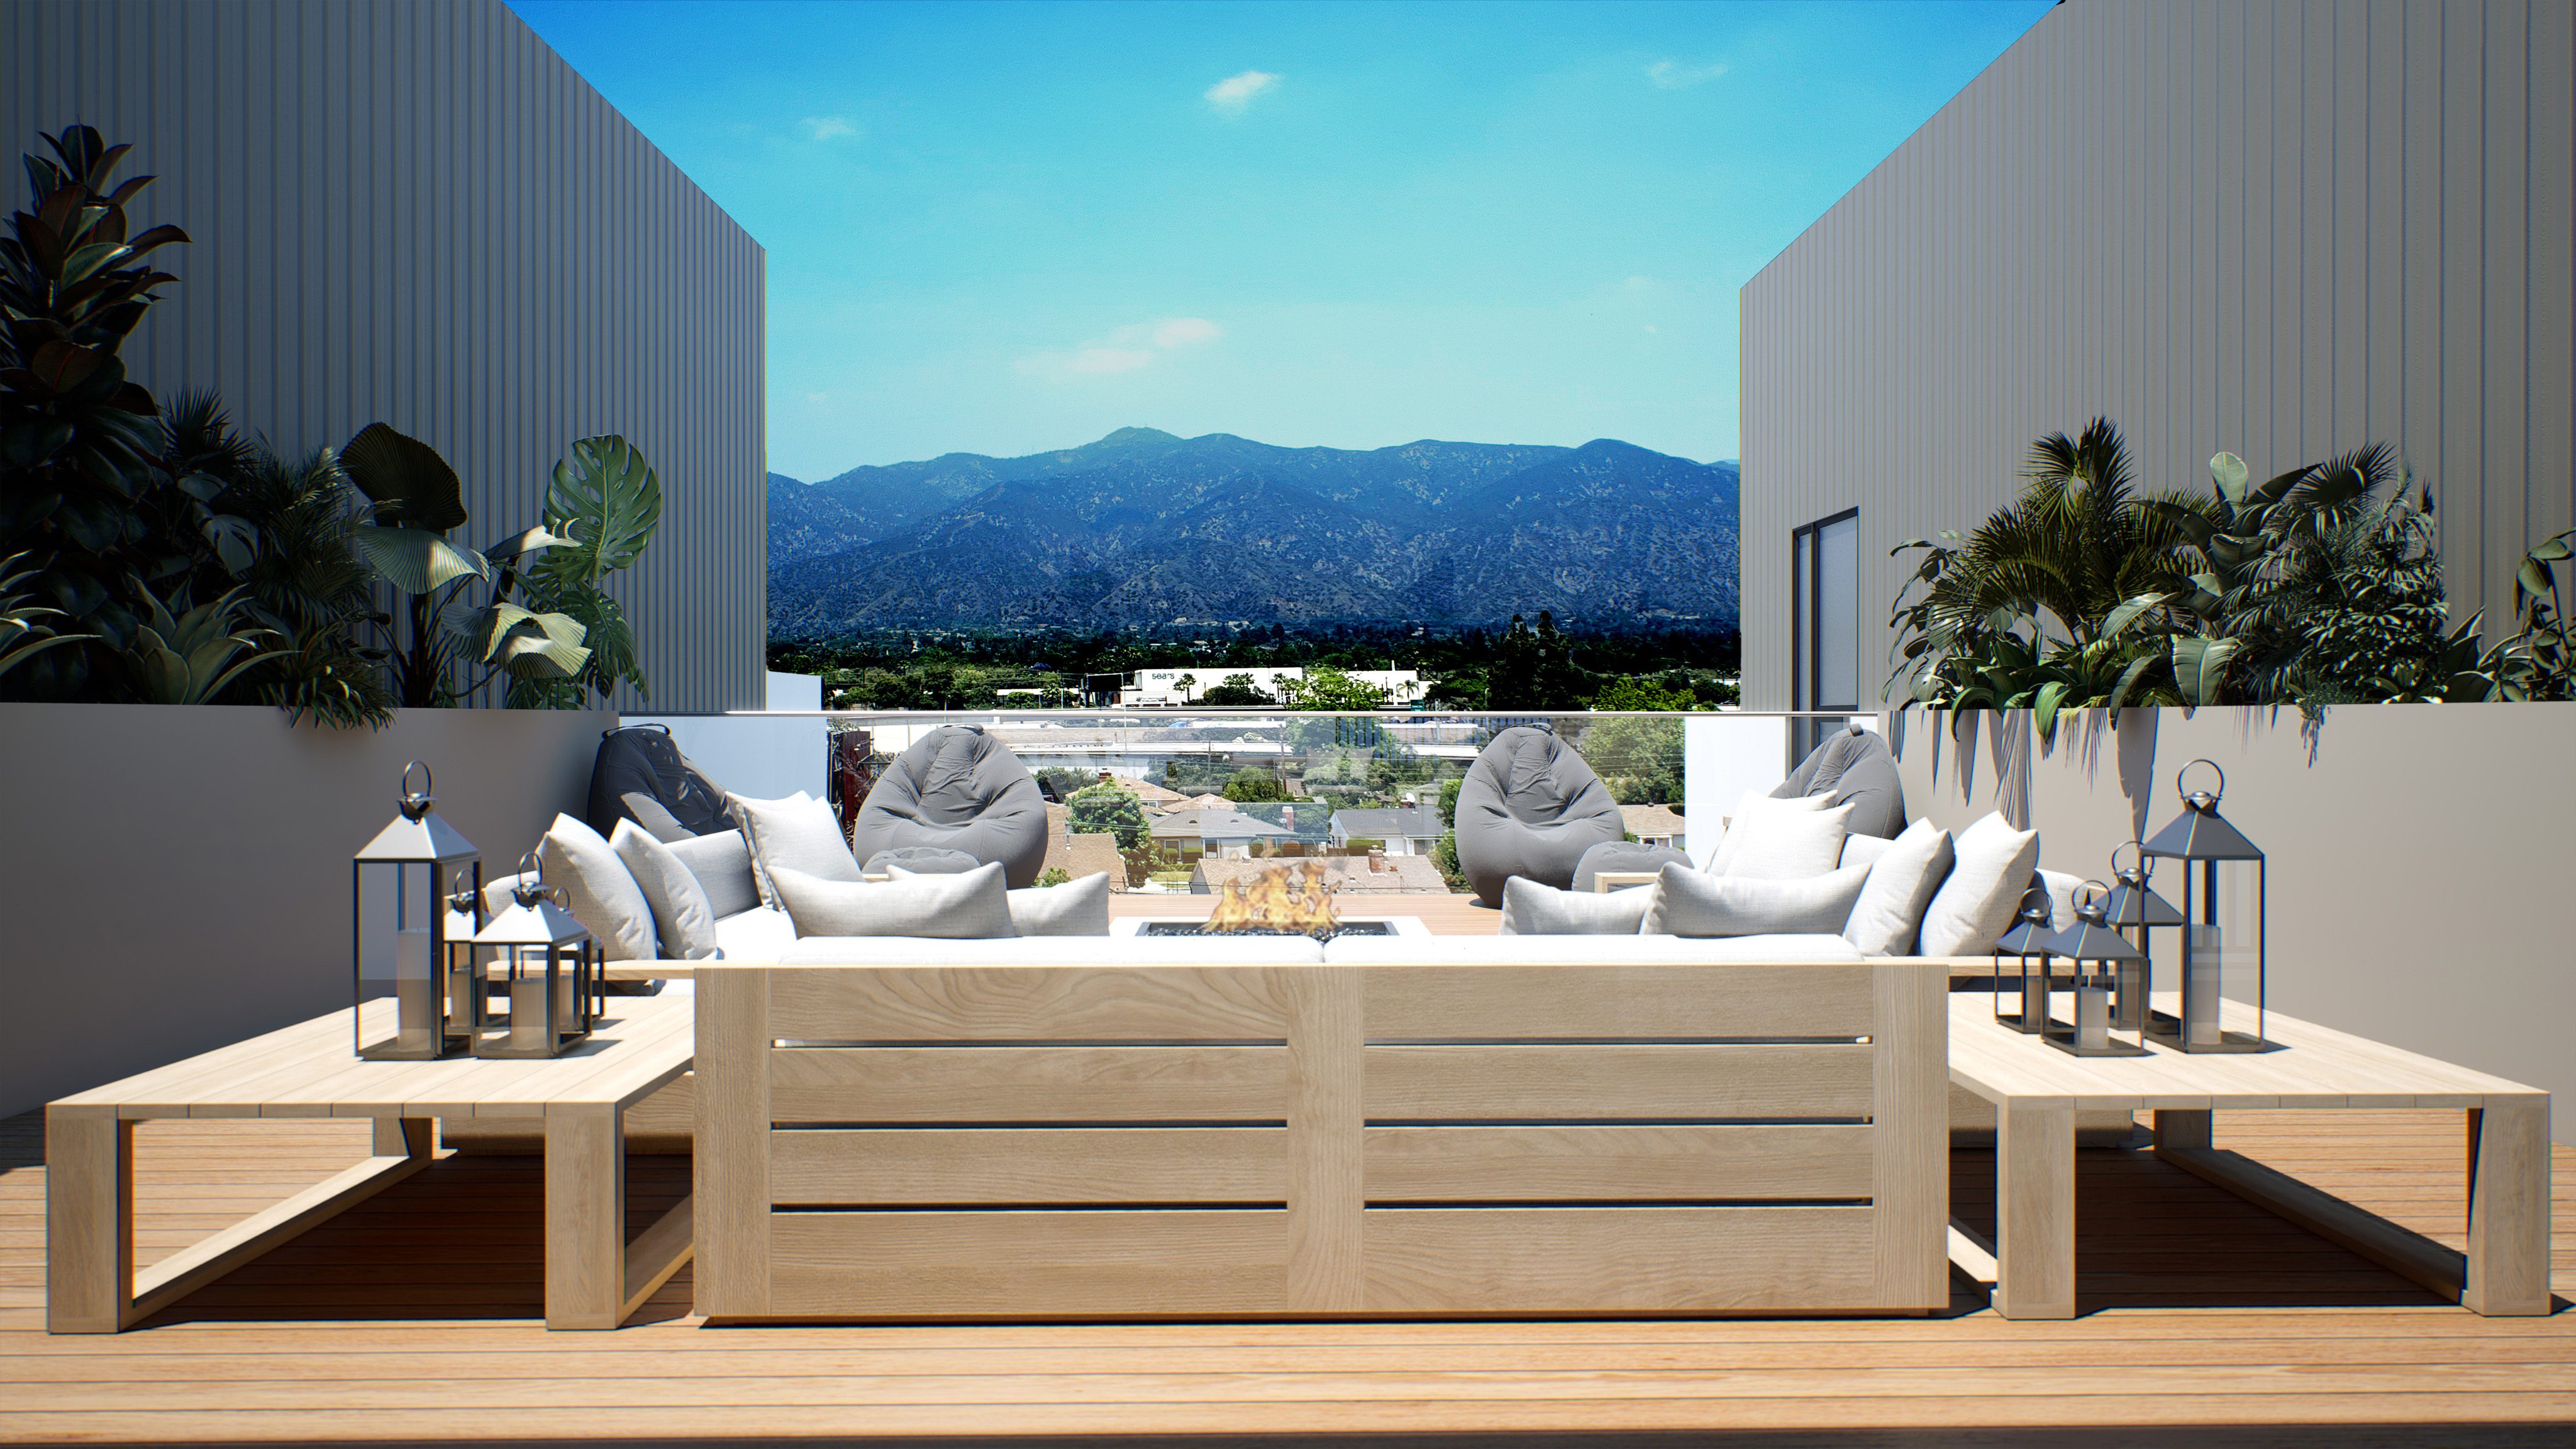 Outdoor patio with cream couches and gray bean bag seating with greenery and a view of Pasadena hills against blue sky